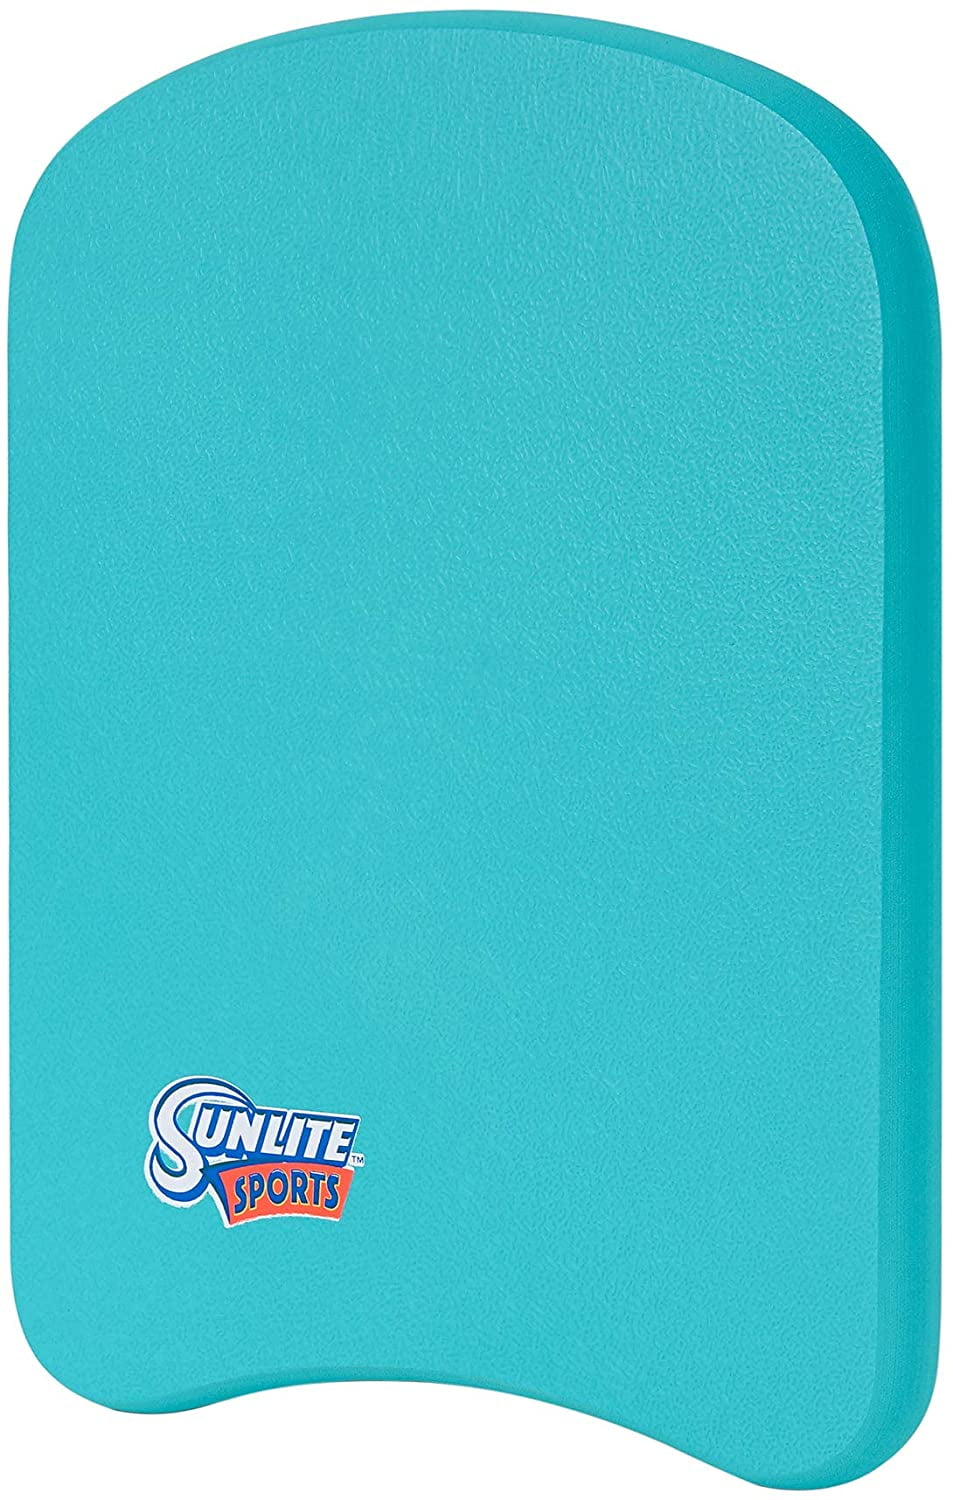 Sunlite Sports Swimming Kickboard Training Aid Float for Swimming and Pool Exer 